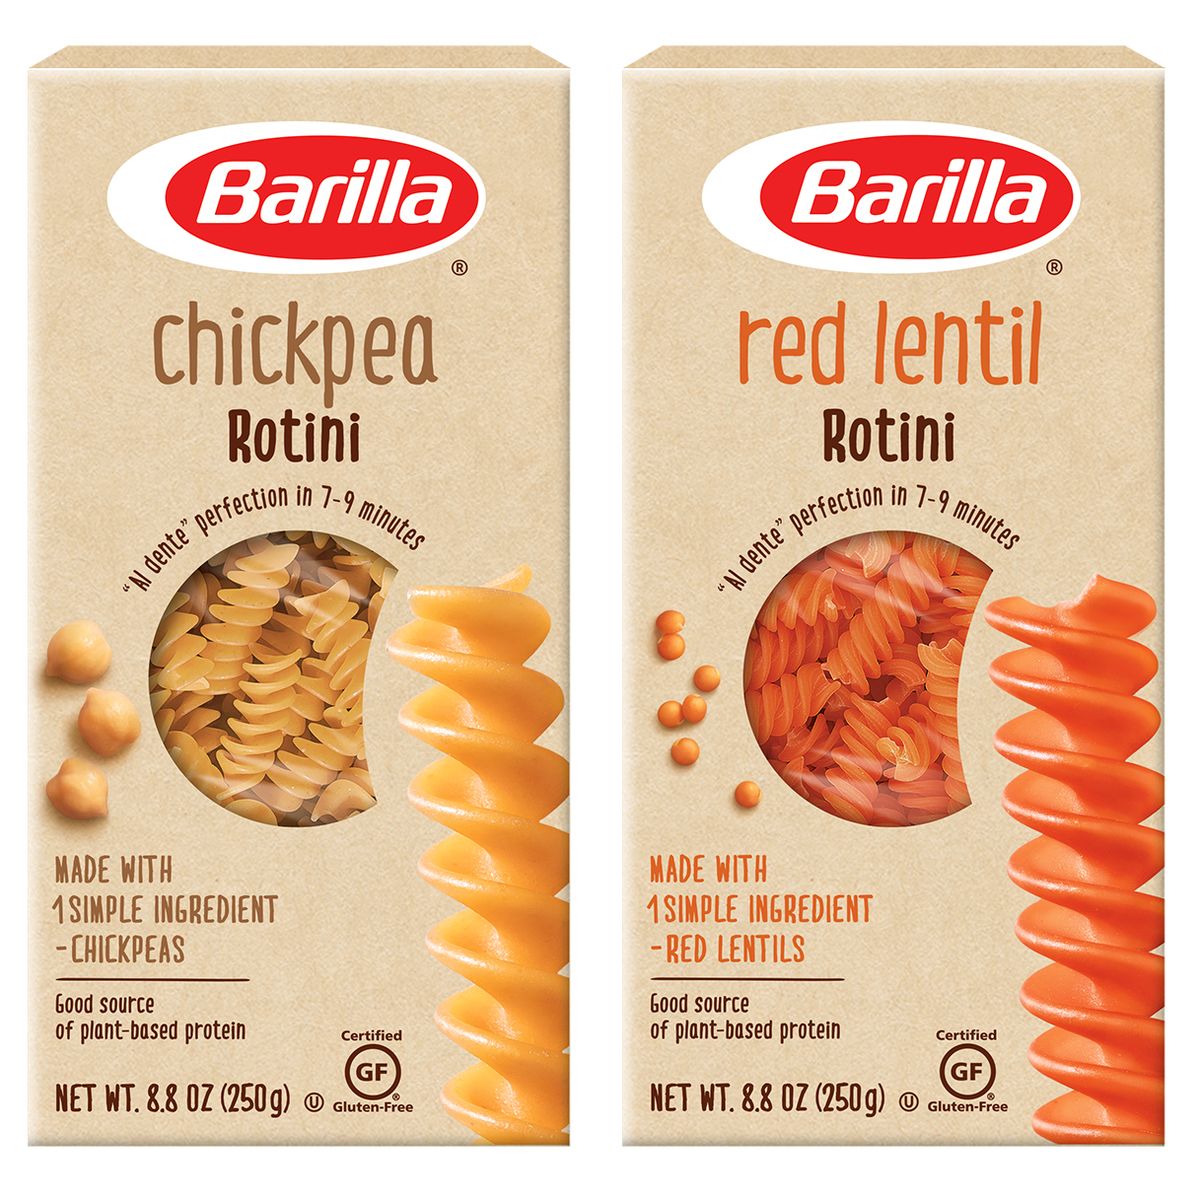 Barilla Is Now Protein-Packed Pasta Chickpea Making